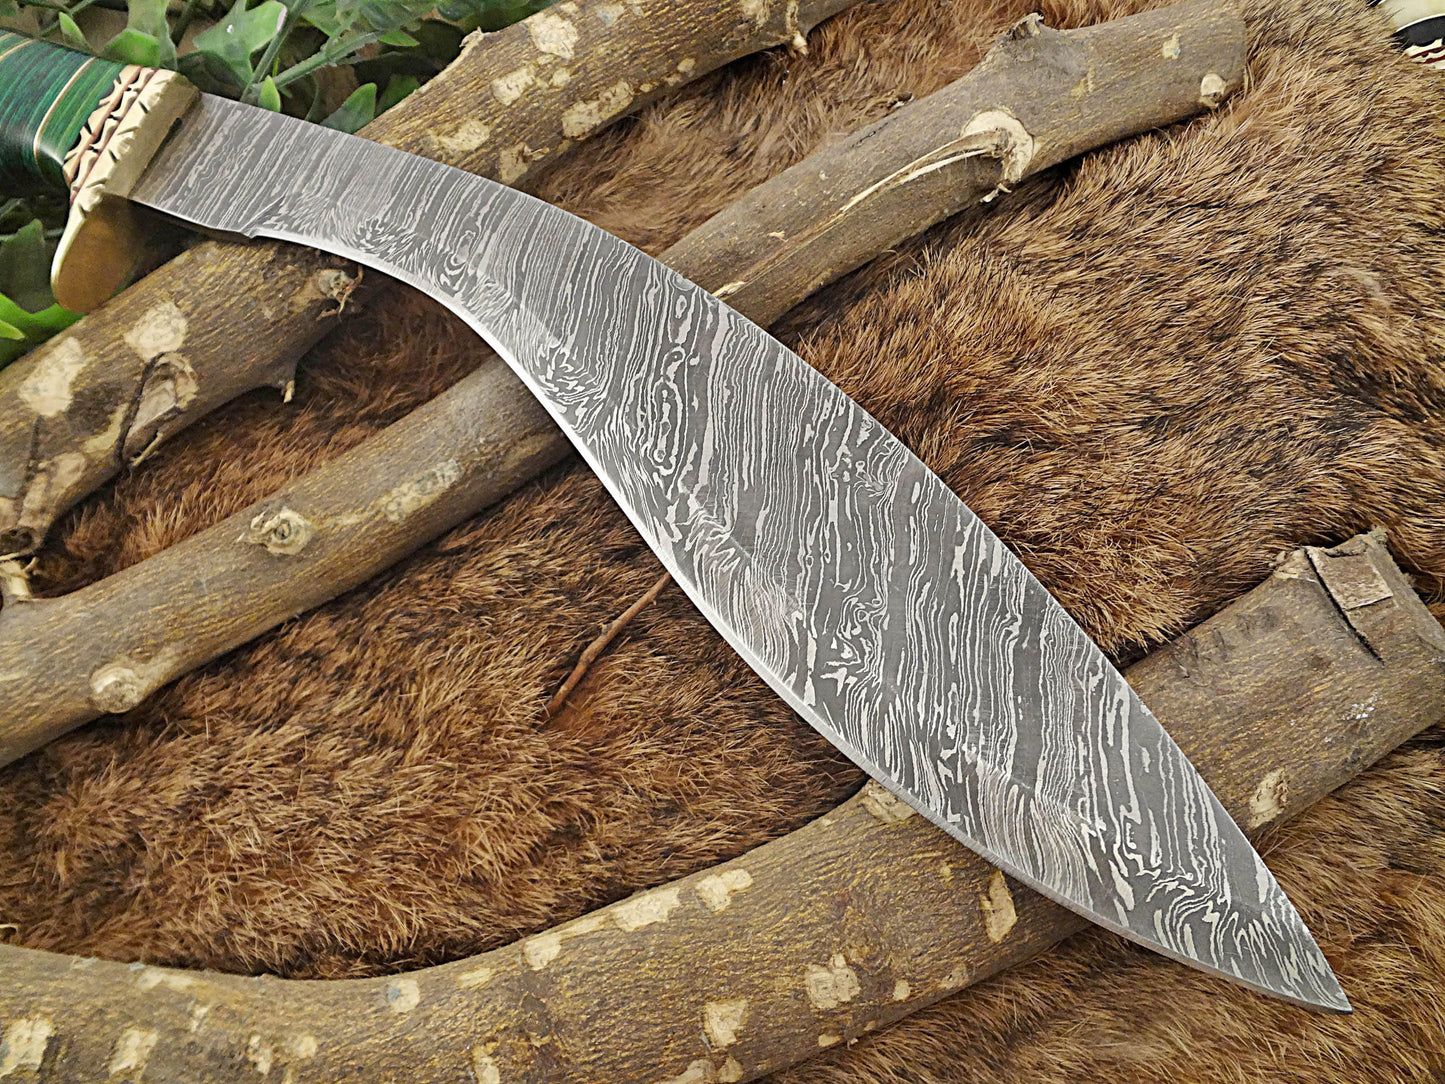 Damascus Steel Kukri Knife 15 Inches custom made Hand Forged With 10" long blade, Green wood with engraved brass scale, Cow Leather Sheath